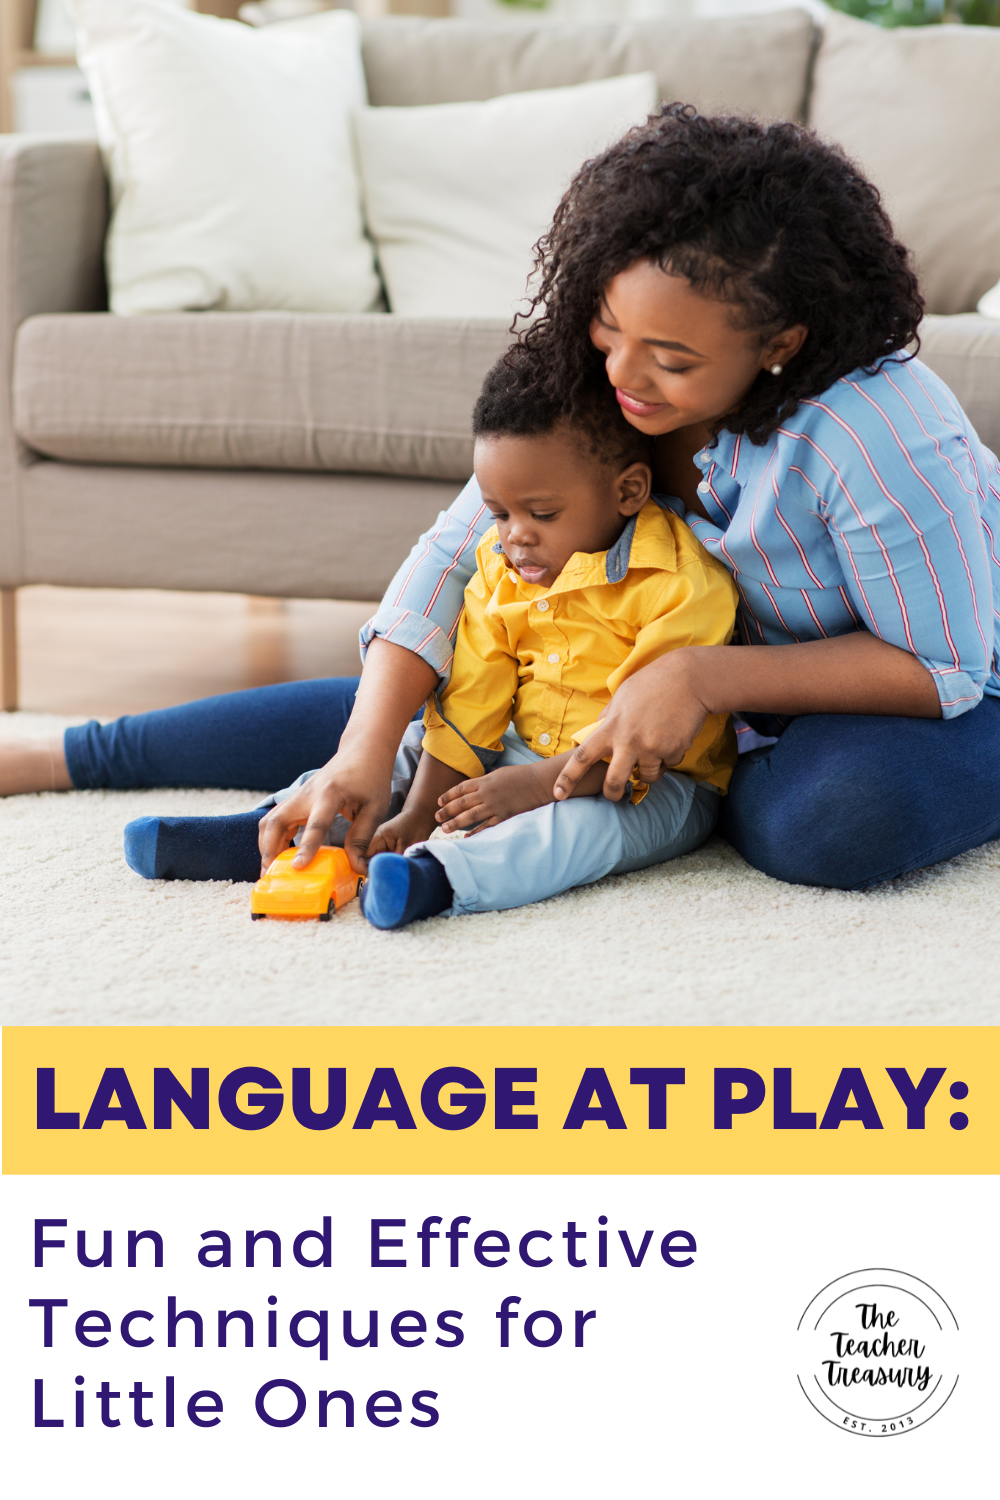 A mother playfully pushes a toy car on the floor with her toddler, pointing and naming colors and shapes, turning everyday moments into a language learning adventure